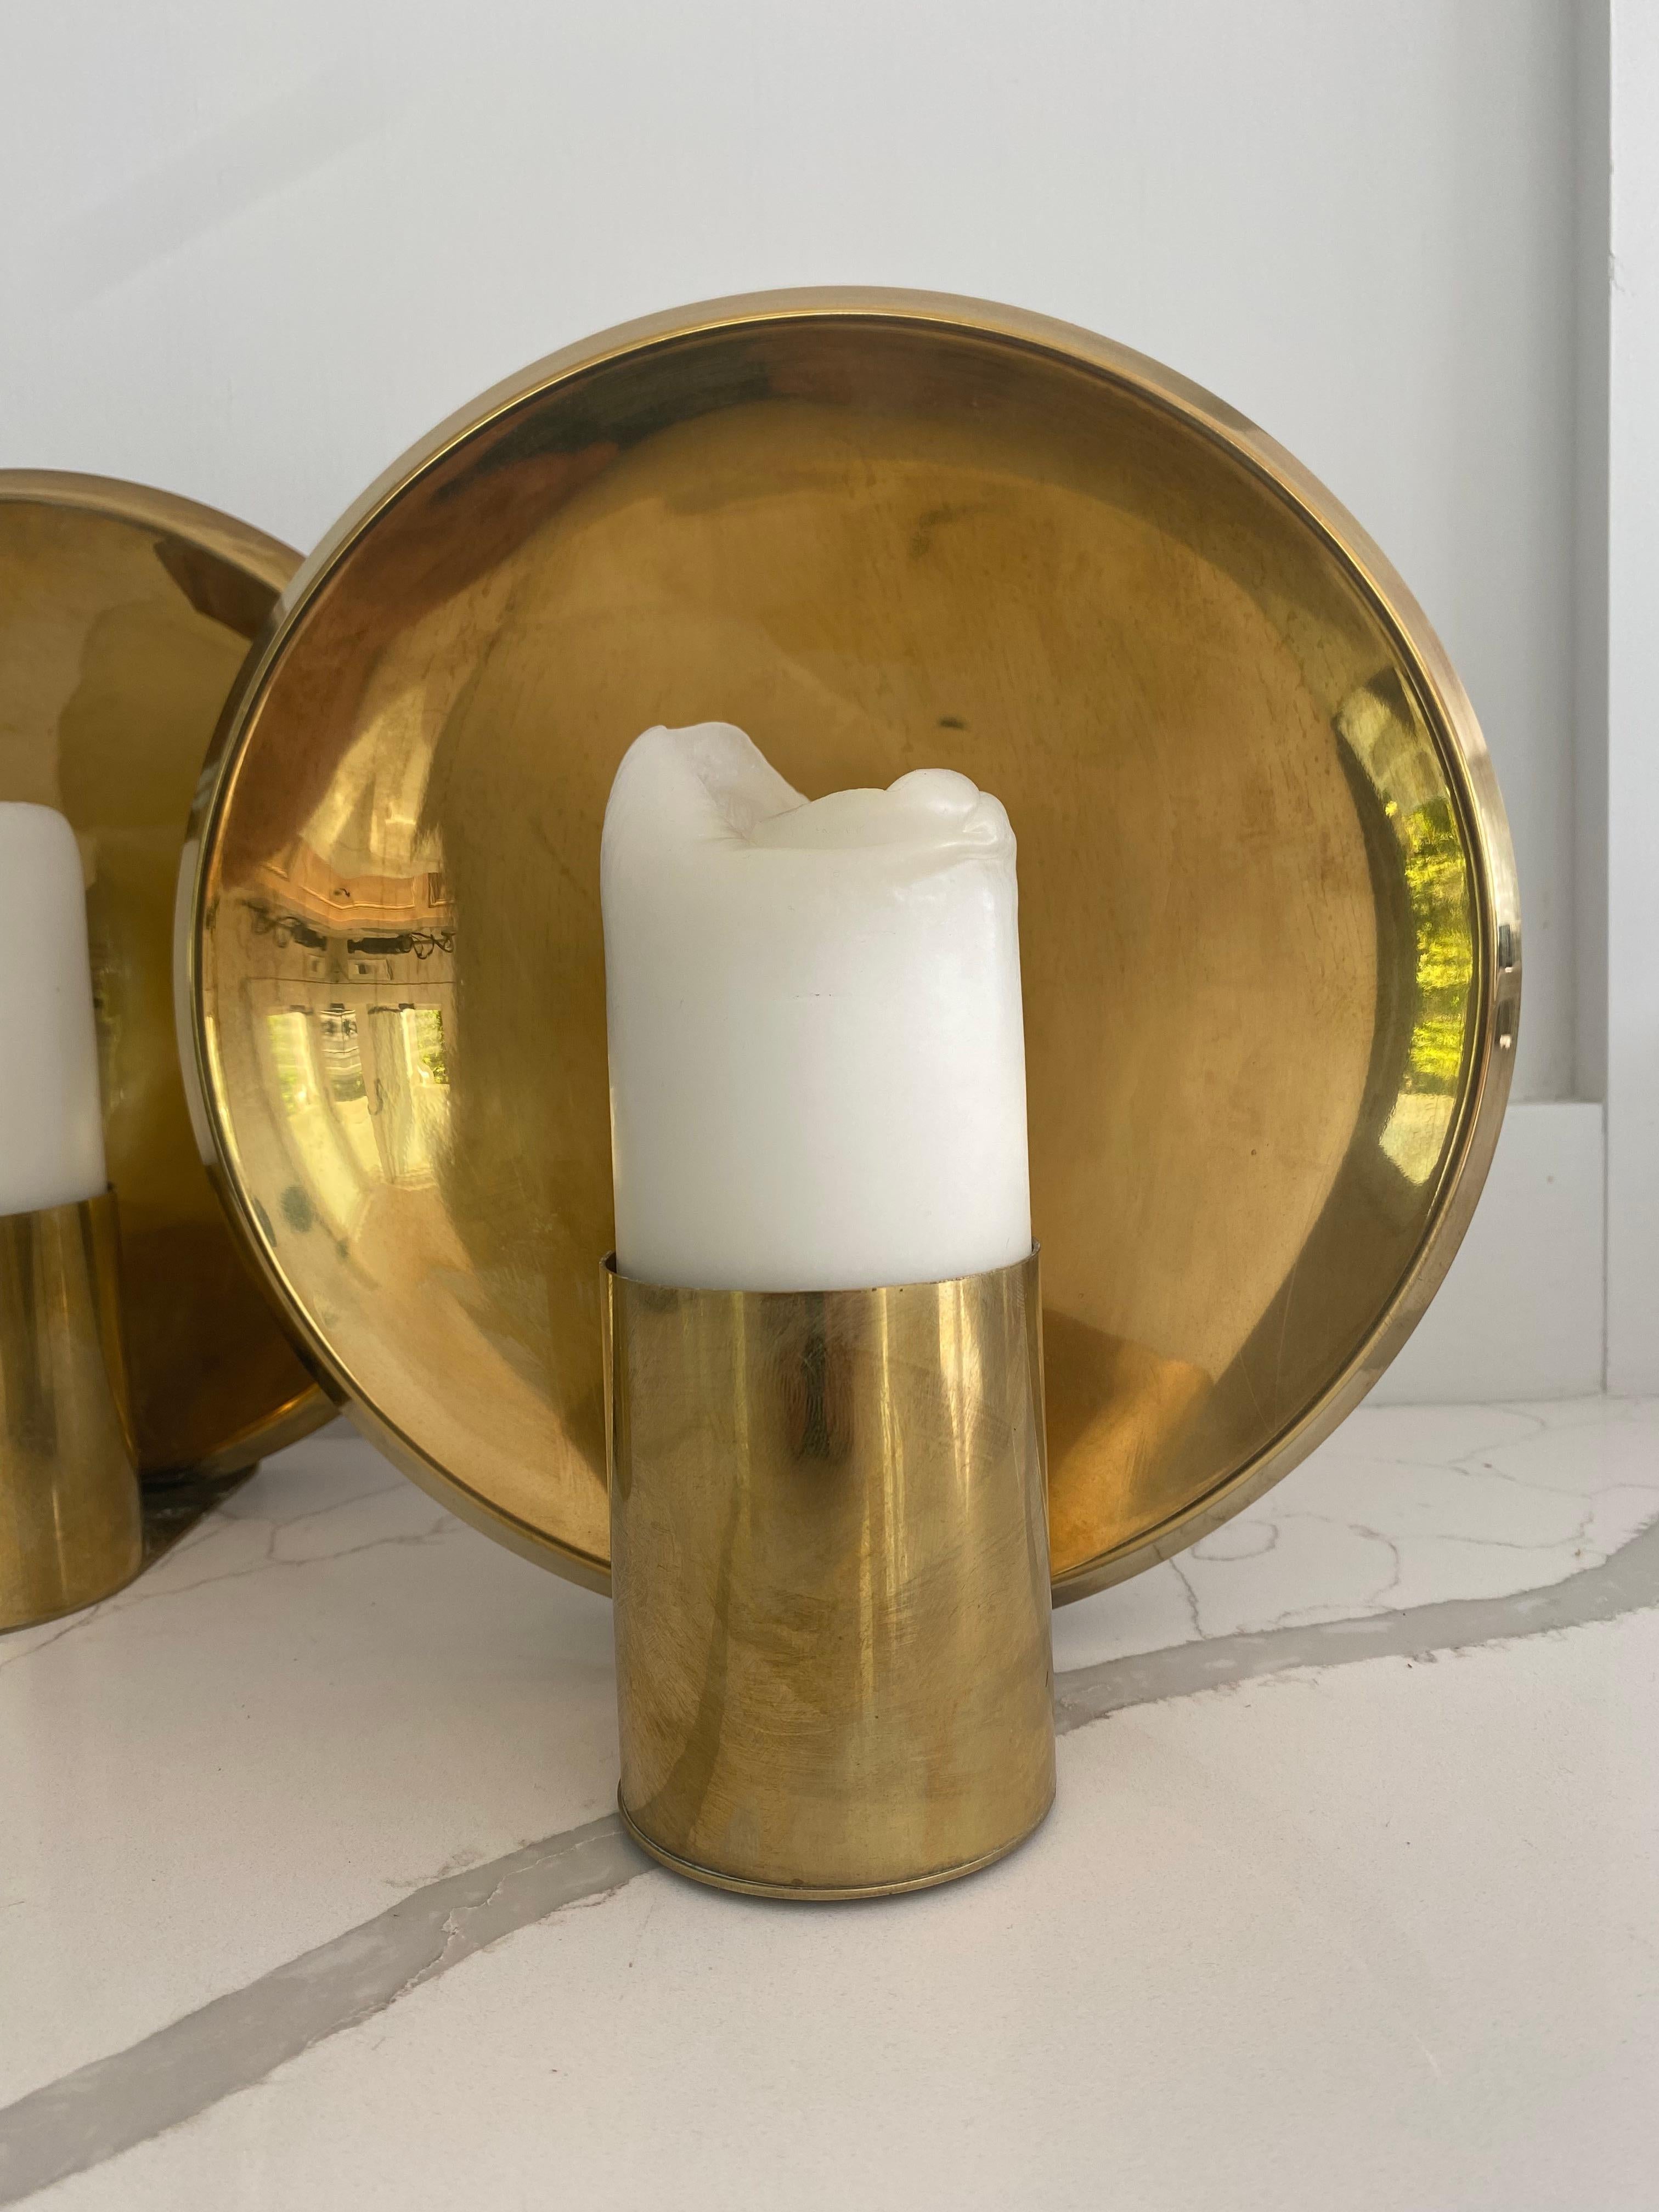 Pair of modern stylish sconces for transitional interiors.
Round 10 inch circular back plate with bold candle holder.
Statement piece.
.
Depth 4.5 inches